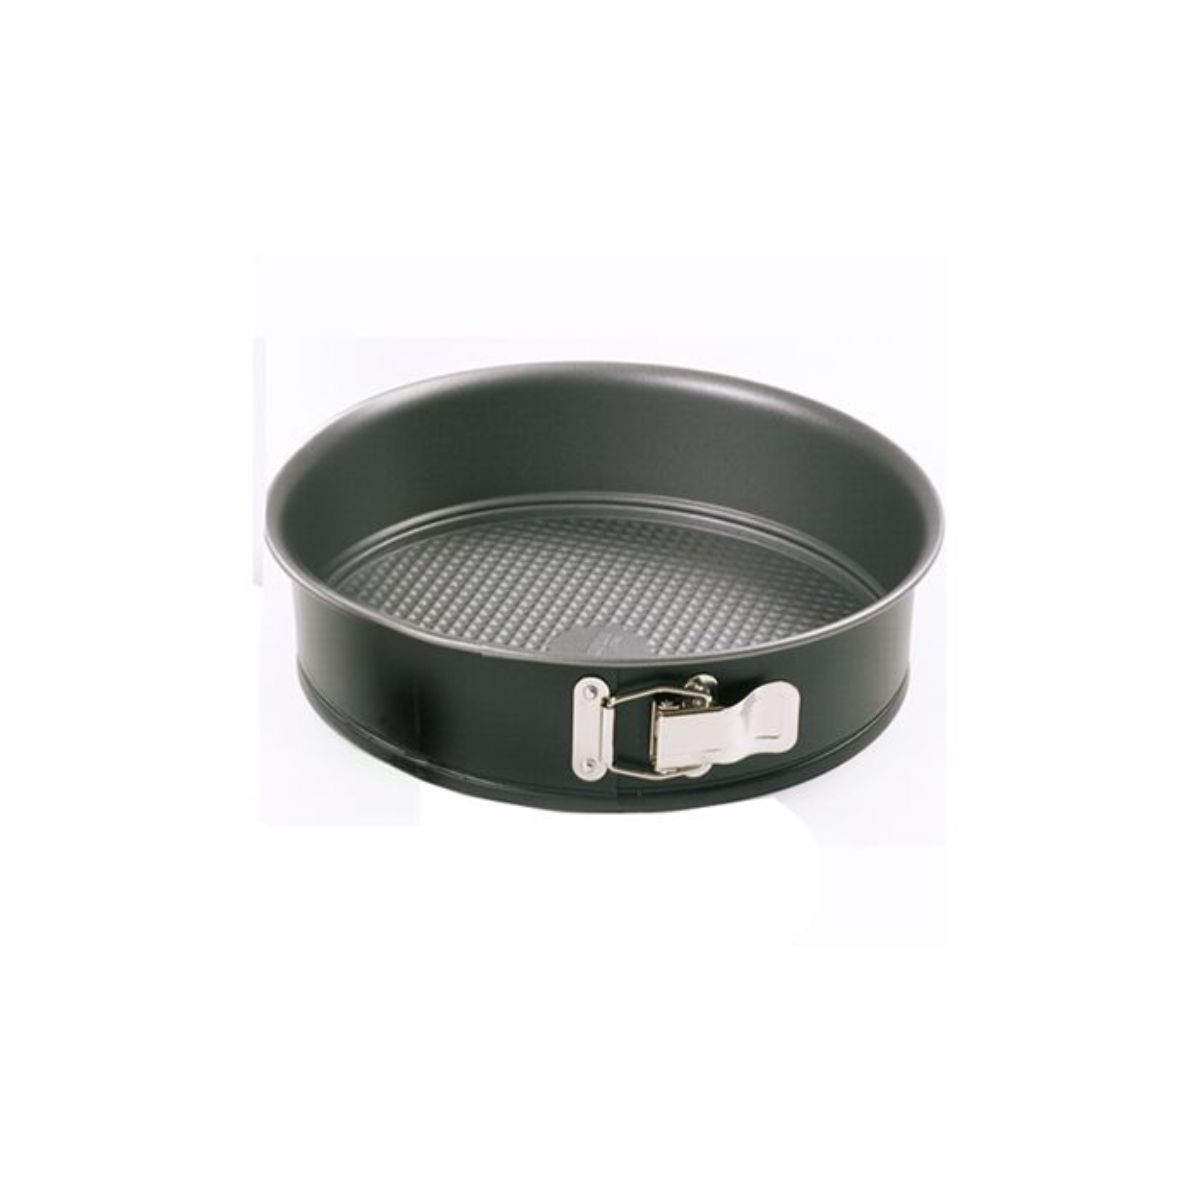 Norpro Deluxe 12 Cup Mini Cheesecake Pan